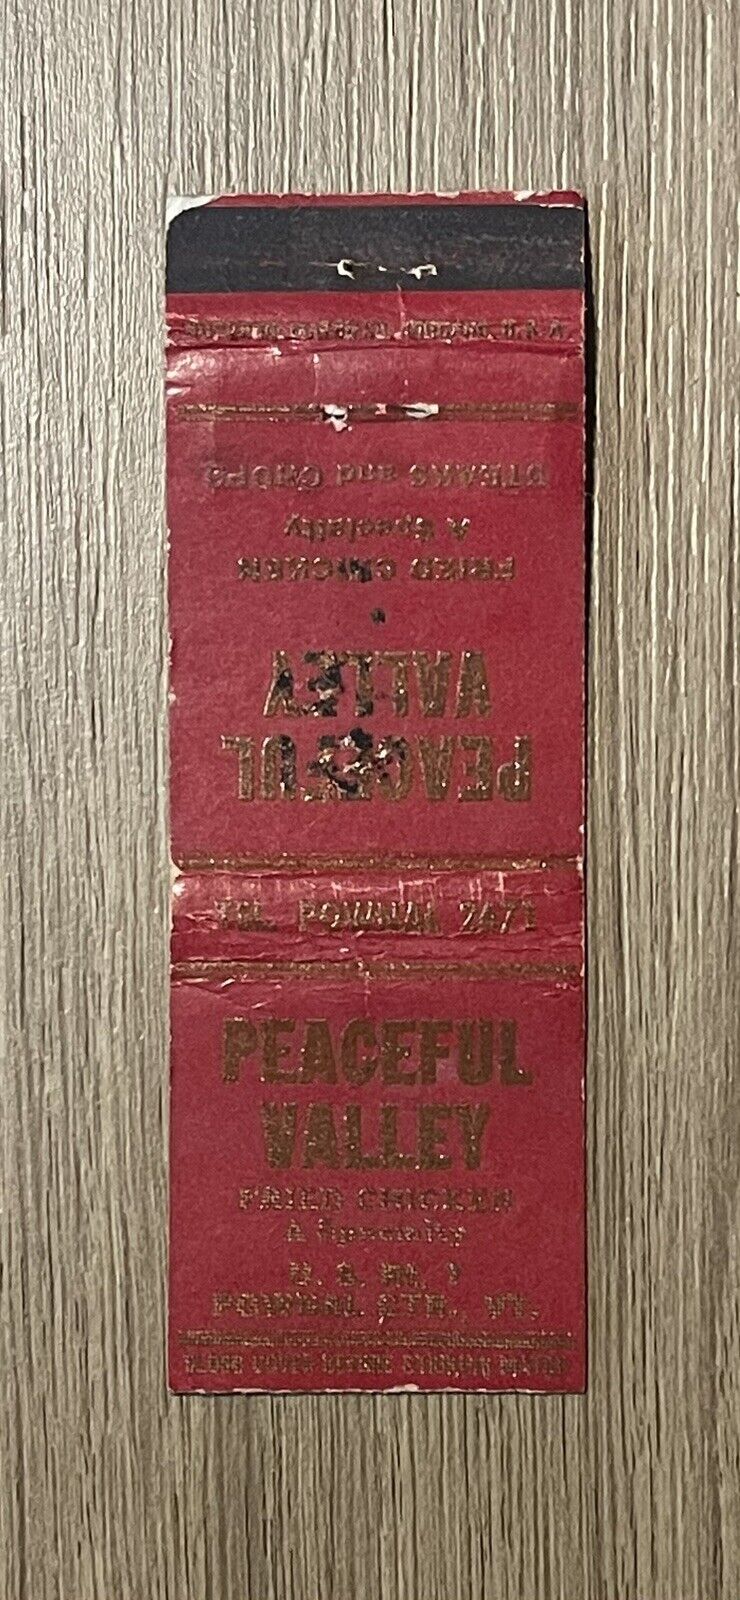 Peaceful Valley Pownal Center Vermont Vintage Matchbook Cover